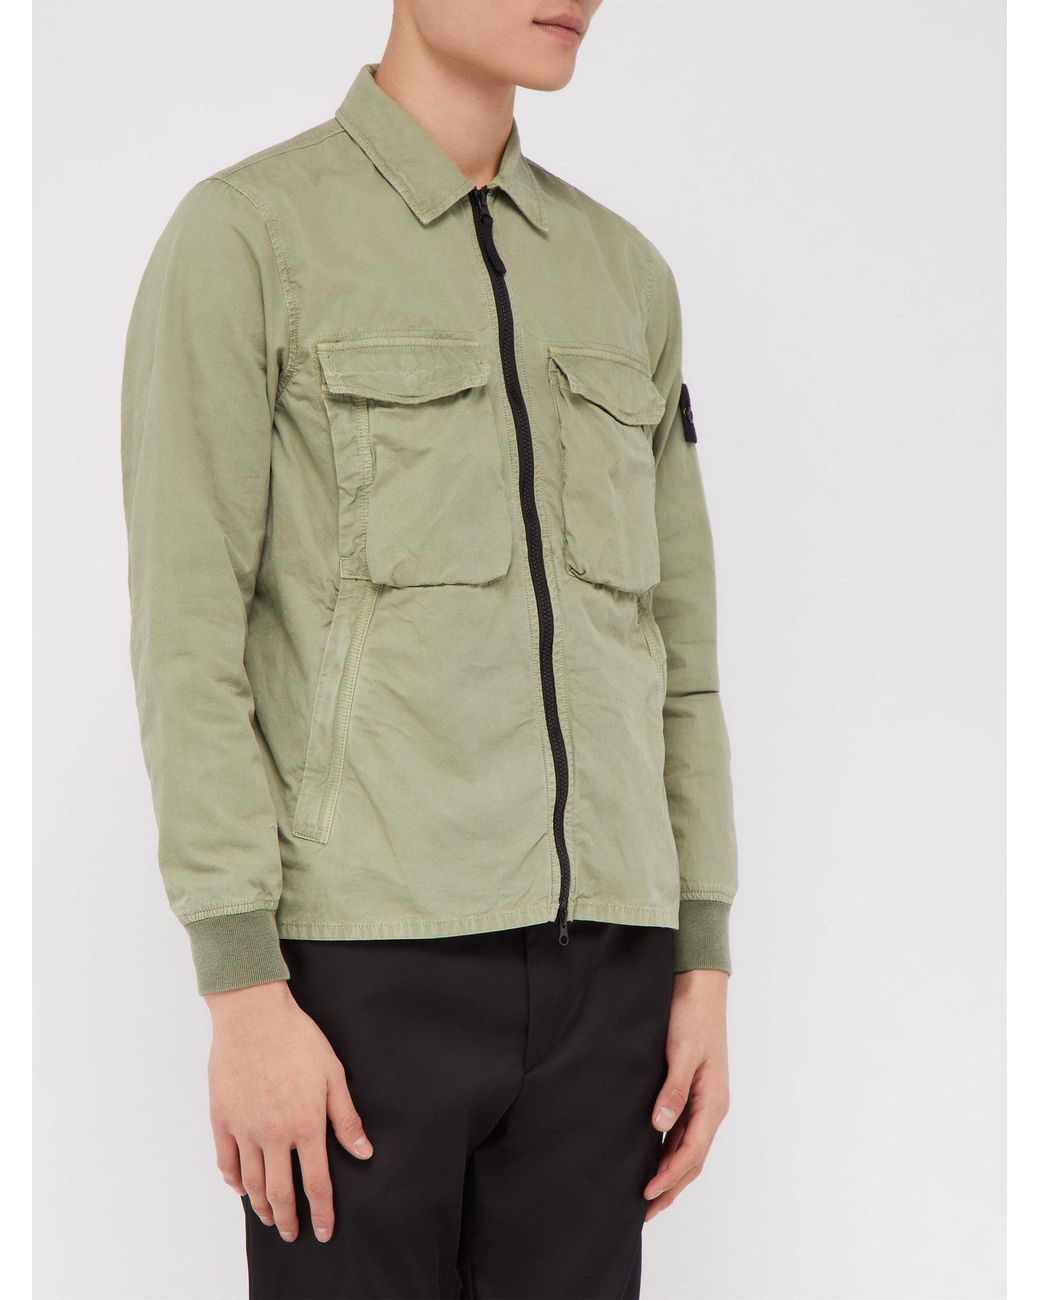 Stone Island Brushed Cotton Canvas Overshirt in Green for Men | Lyst